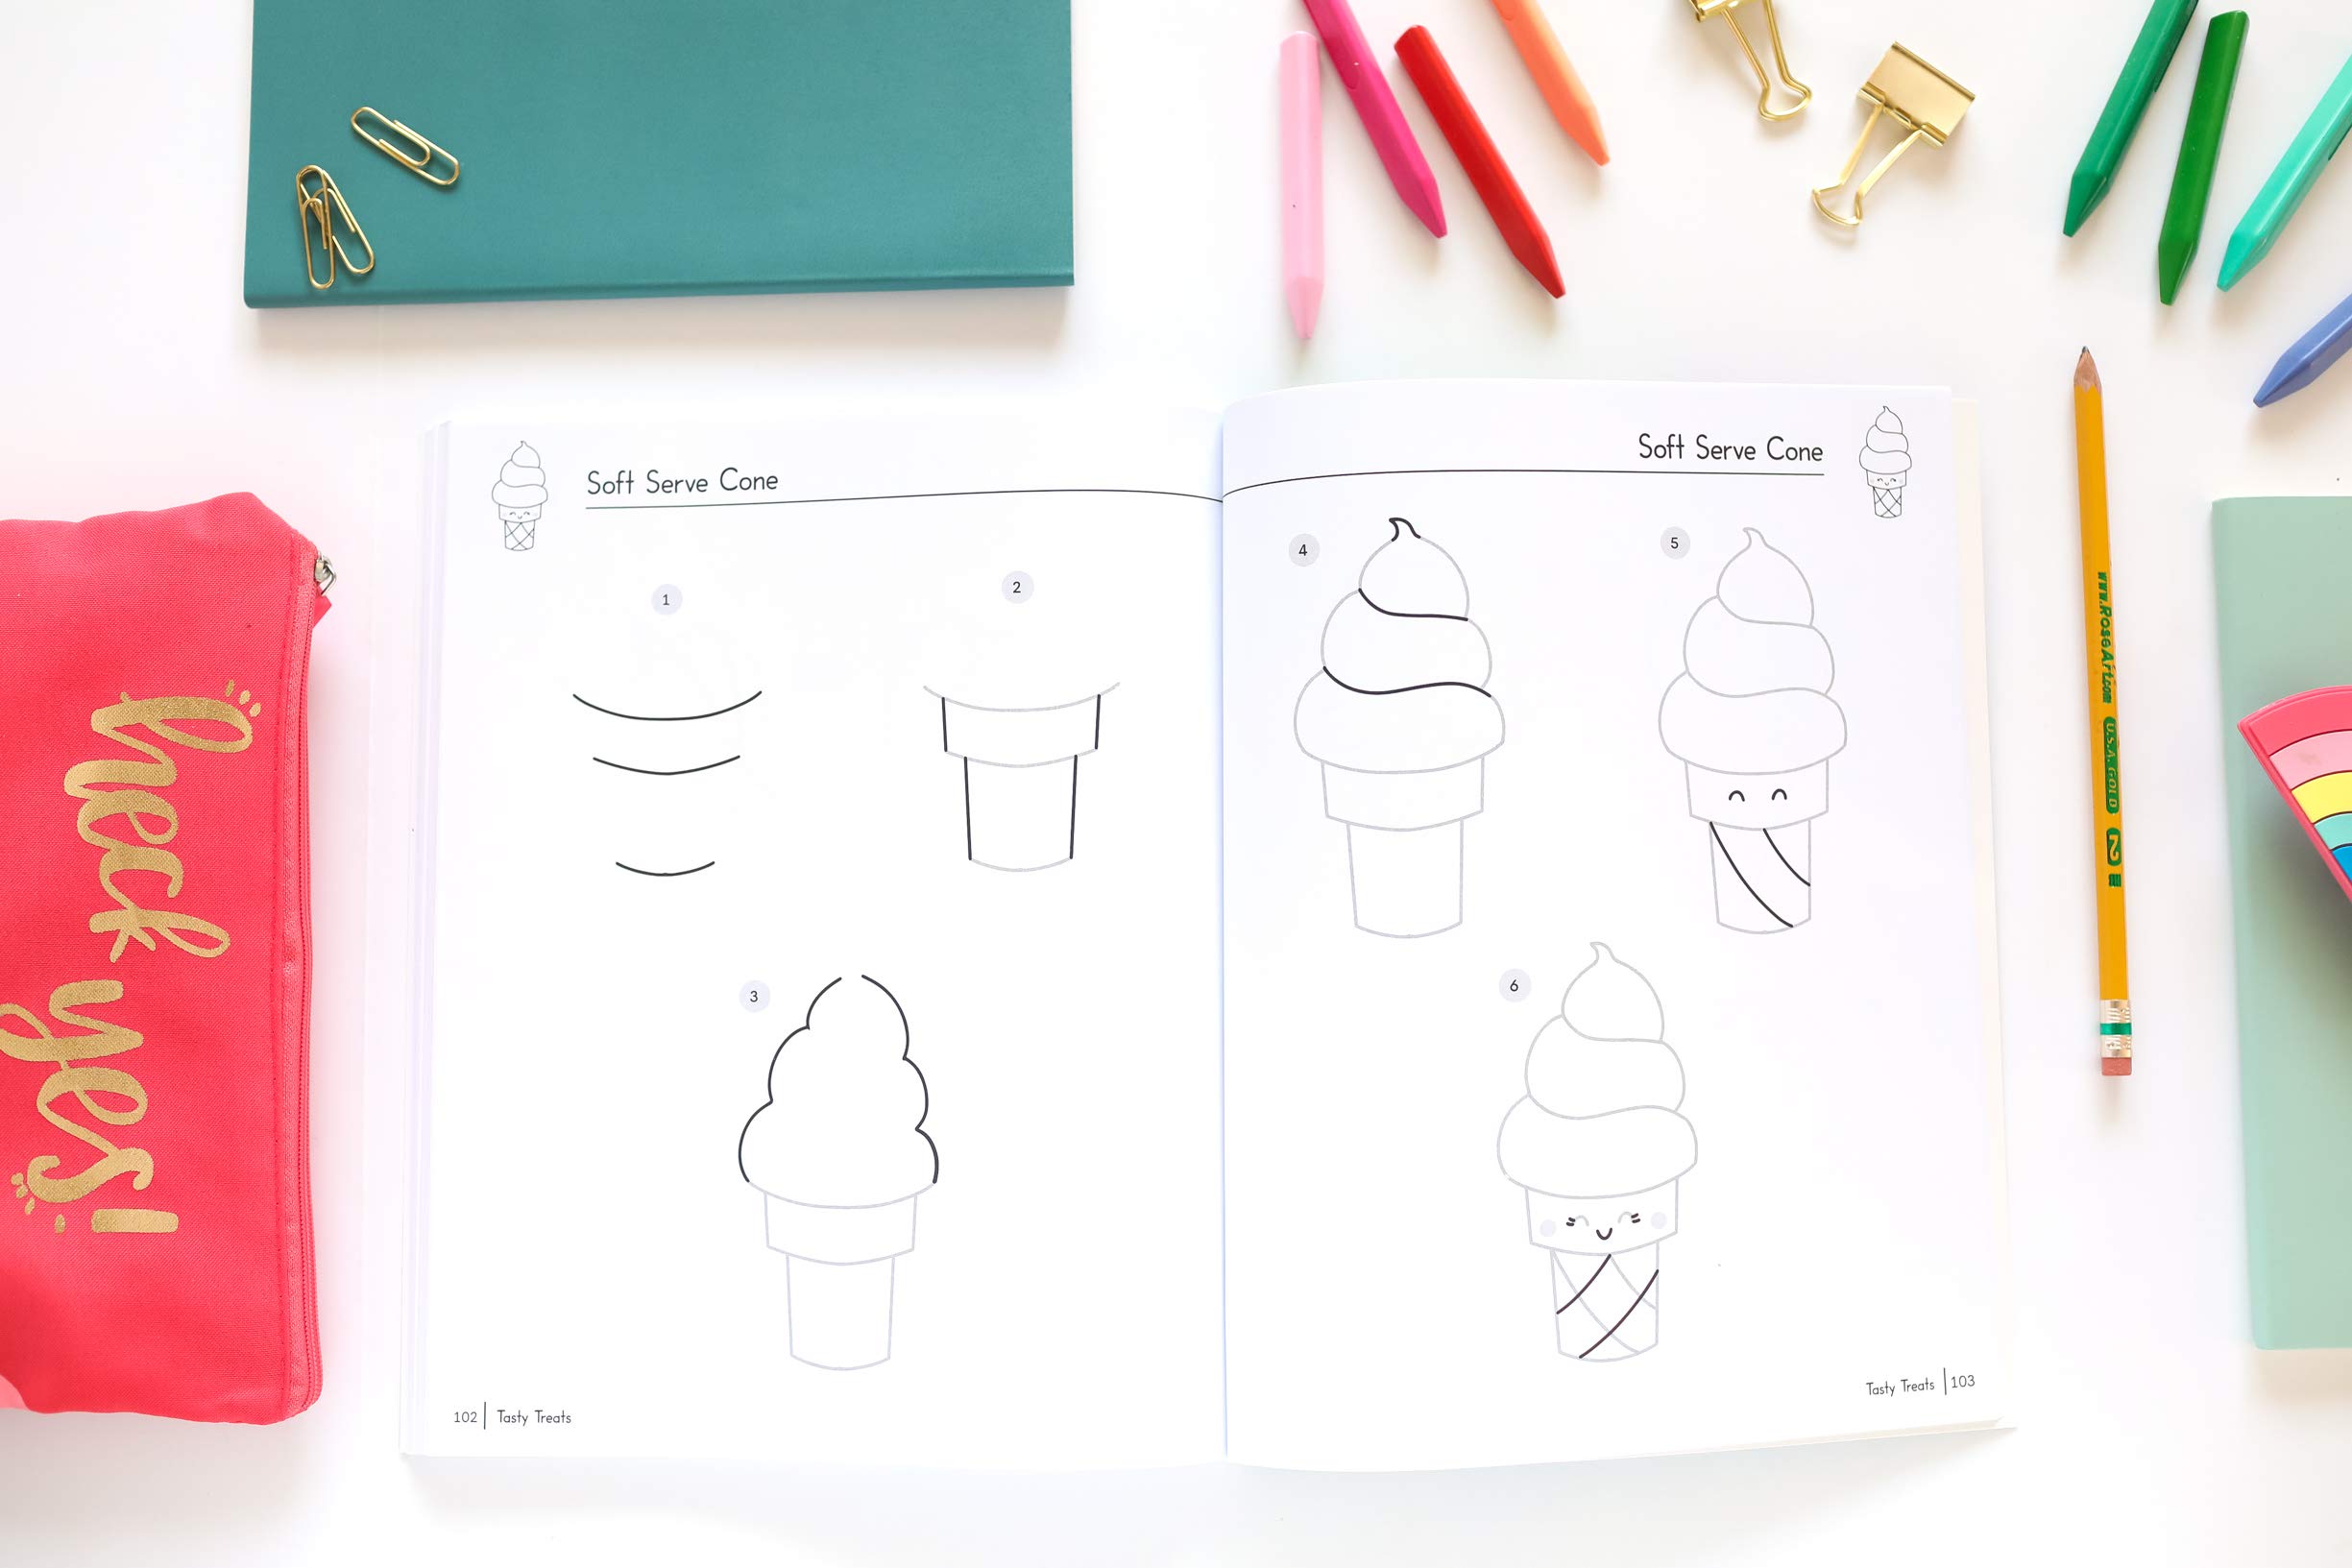 The How to Draw Book for Kids: A Simple Step-by-Step Guide to Drawing Cute and Silly Things